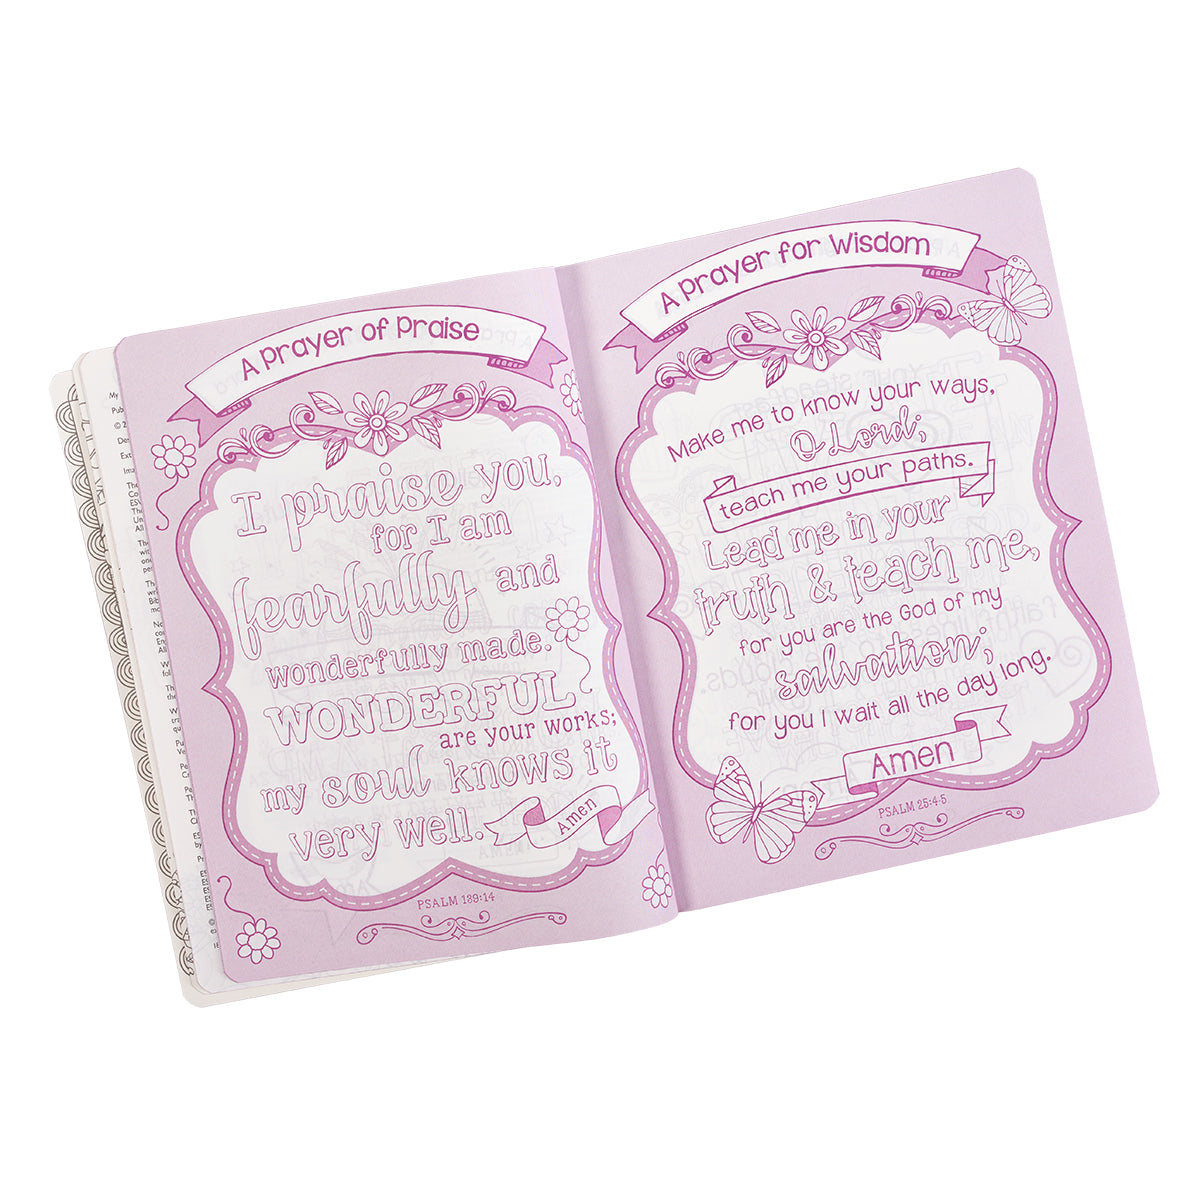 Pink Floral Heart Flexcover My Creative Bible for Girls - an ESV Journaling Bible - The Christian Gift Company